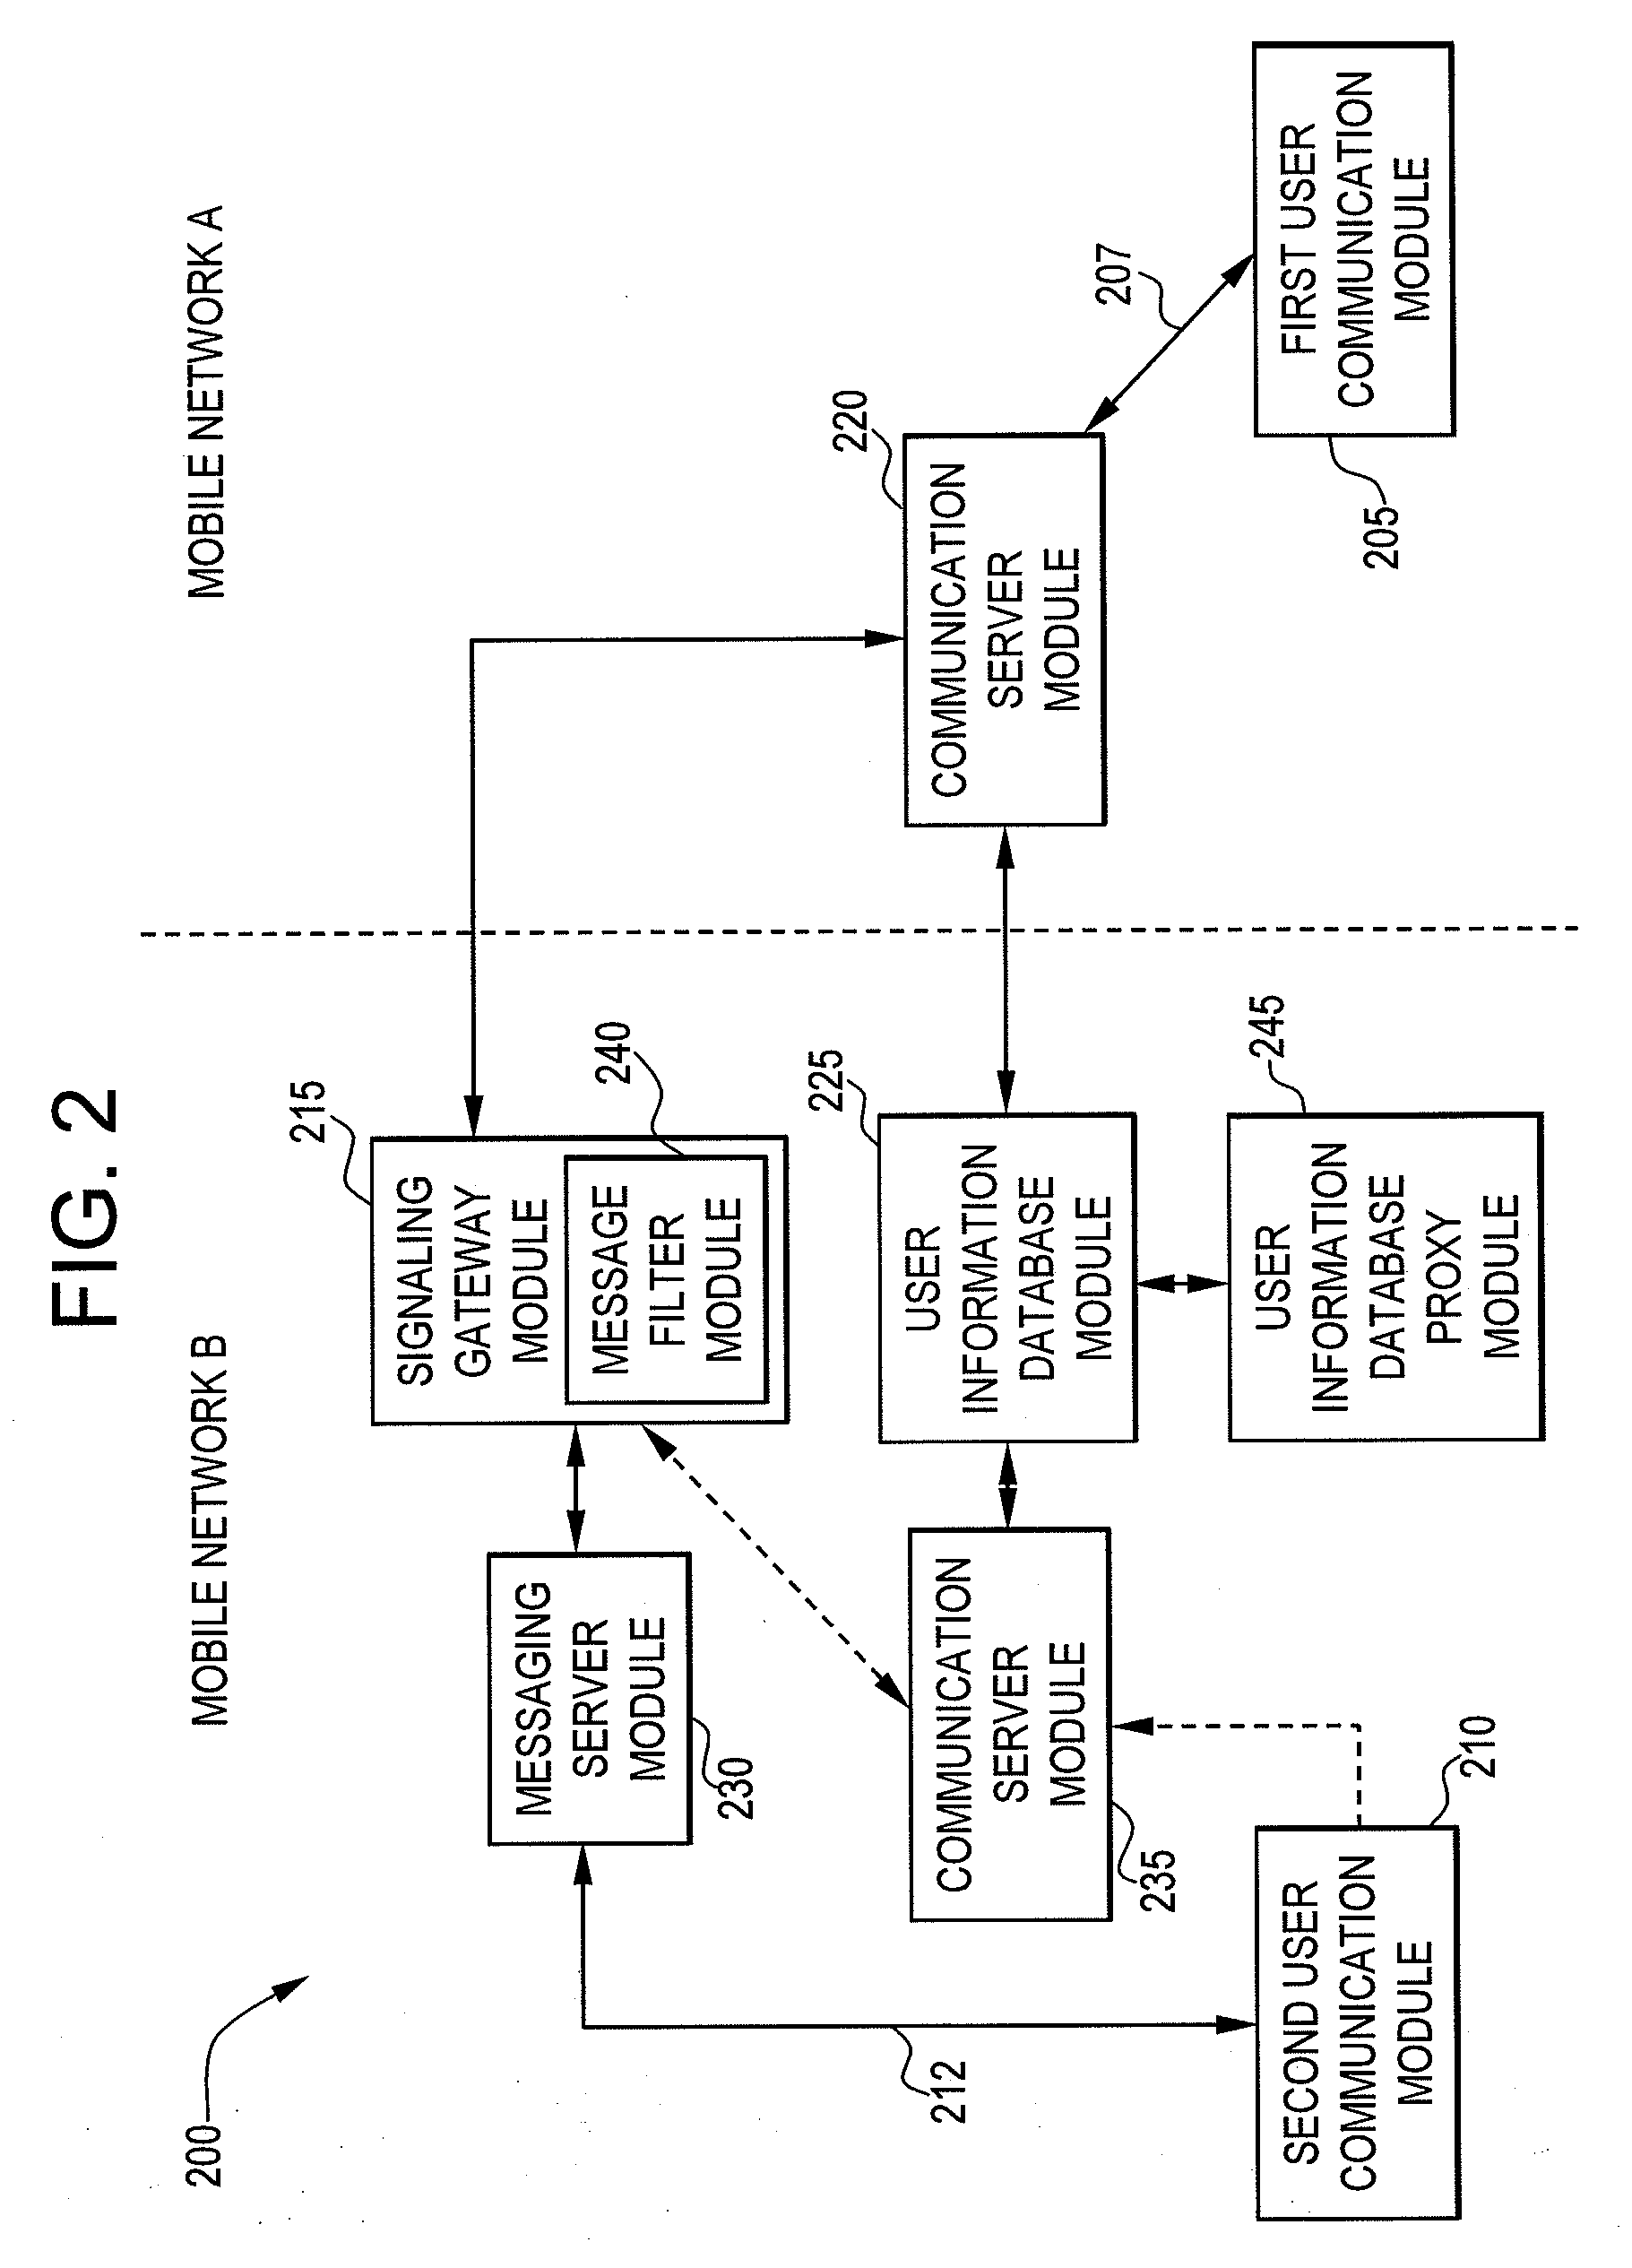 System and method for short message service and instant messaging continuity